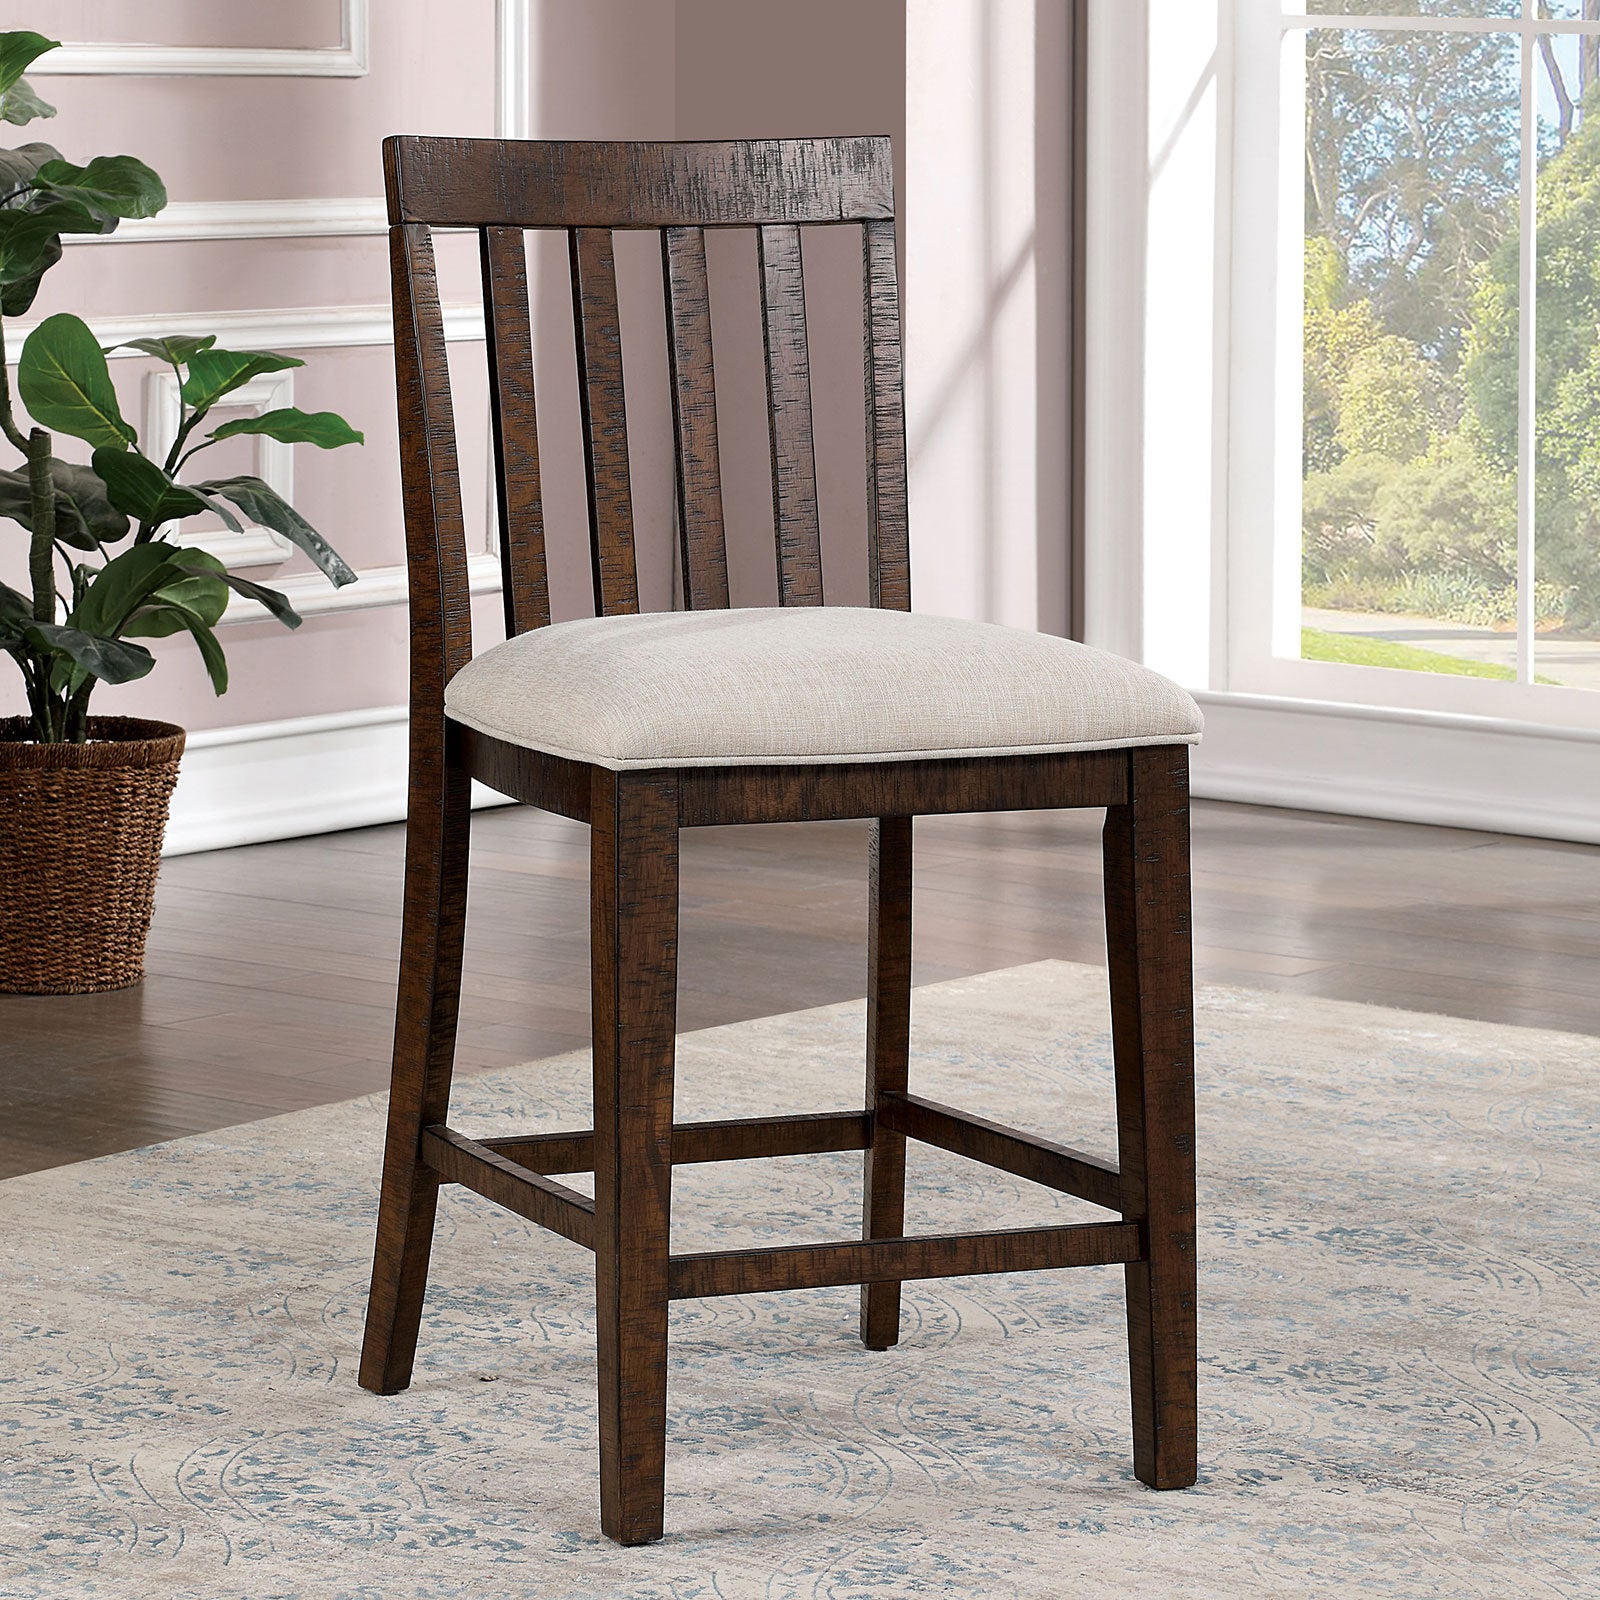 Set of 2pcs Counter Height Stools Dining Room